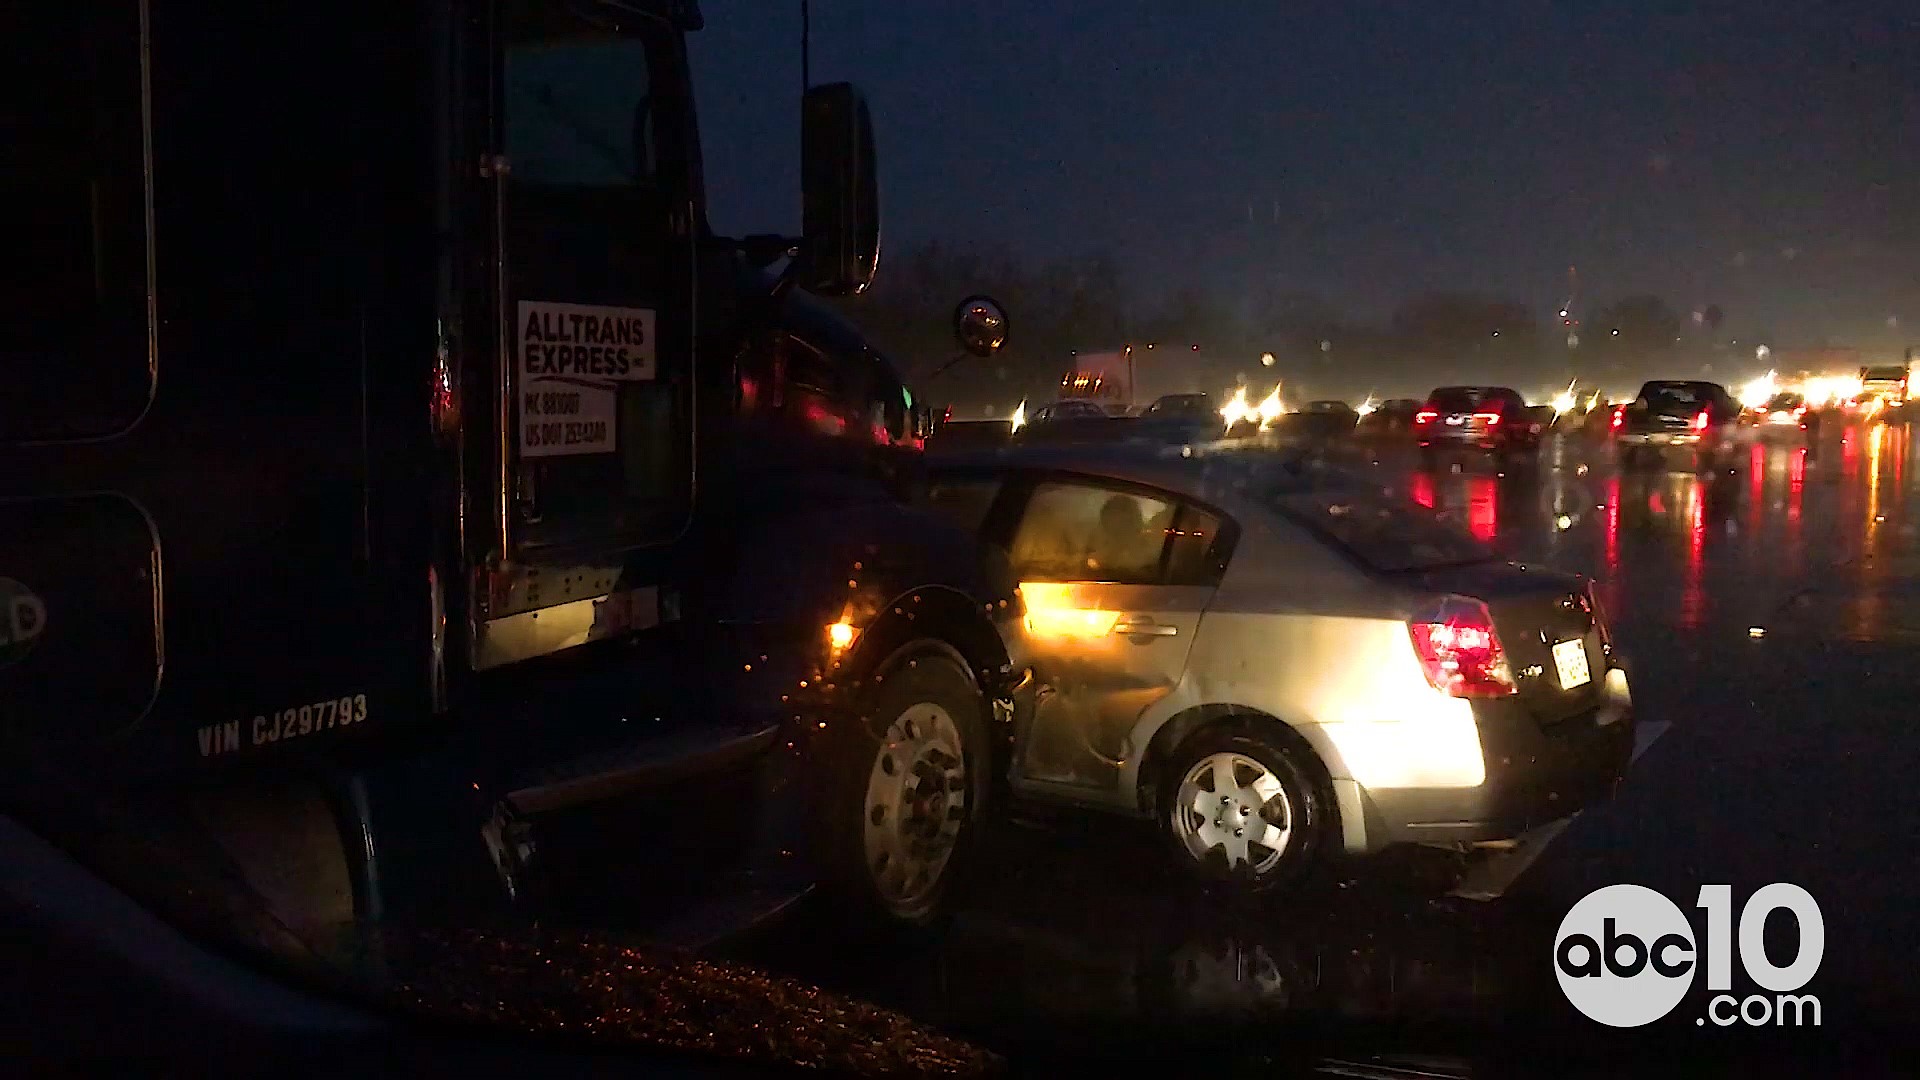 A downpour during the Wednesday morning commute led to dozens of crashes on Sacramento area freeways. Wrecks blocked traffic on I-5, Highway 50, I-80 and Highway 99 creating gridlock for drivers. This is a raw look at some crashes and backups during the morning commute in Sacramento and Elk Grove, California.